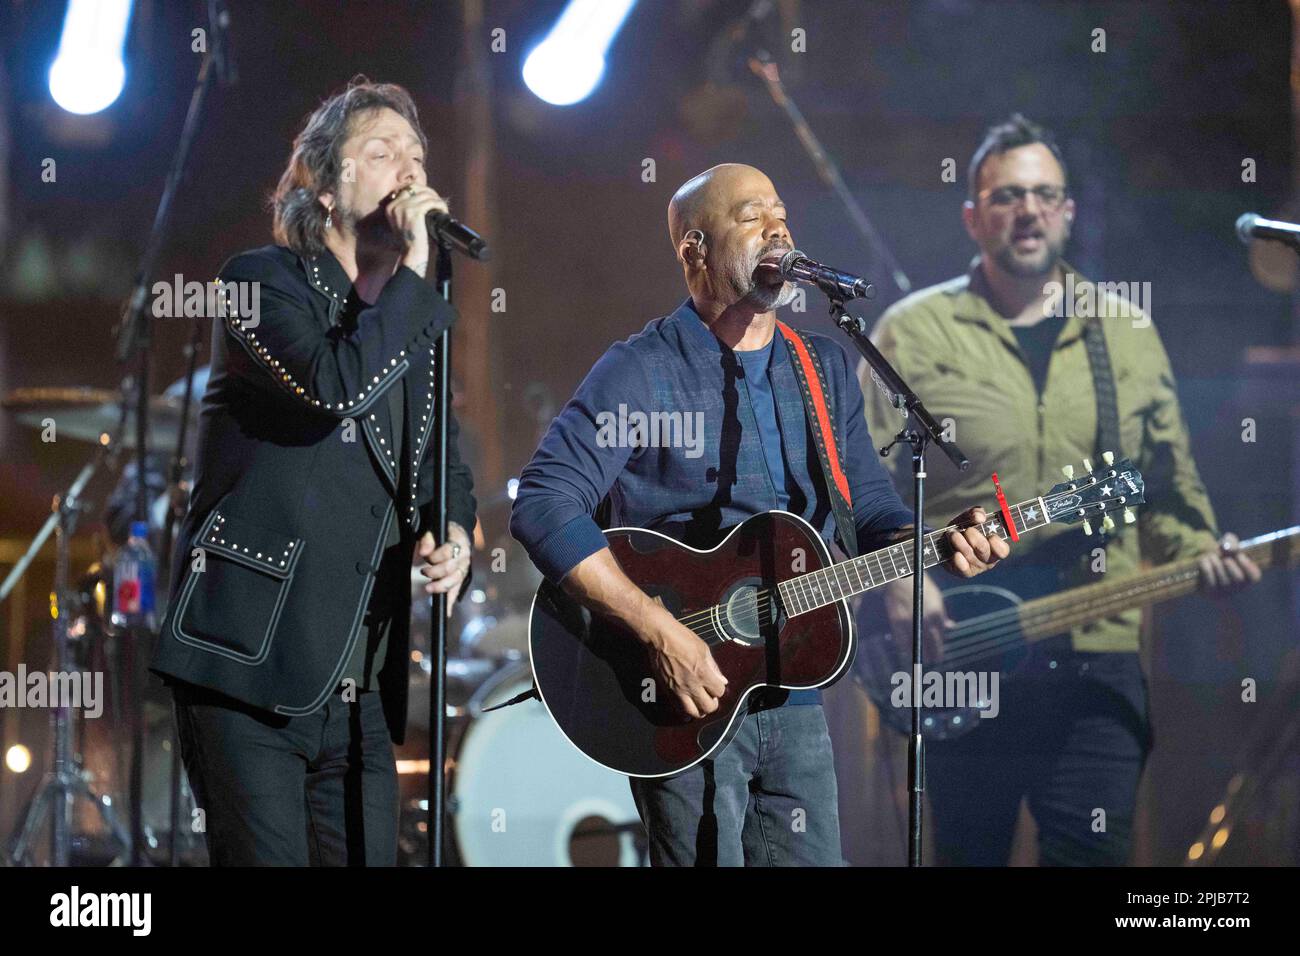 Austin Texas USA, March 31 2023: Chris Robinson of the Black Crowes and country star Darius Rucker perform together during a taping of Country Music Television's long-running Crossroads show at an outdoor stage in downtown. The show brings together a country artist with artists from another musical genre. ©Bob Daemmrich Stock Photo